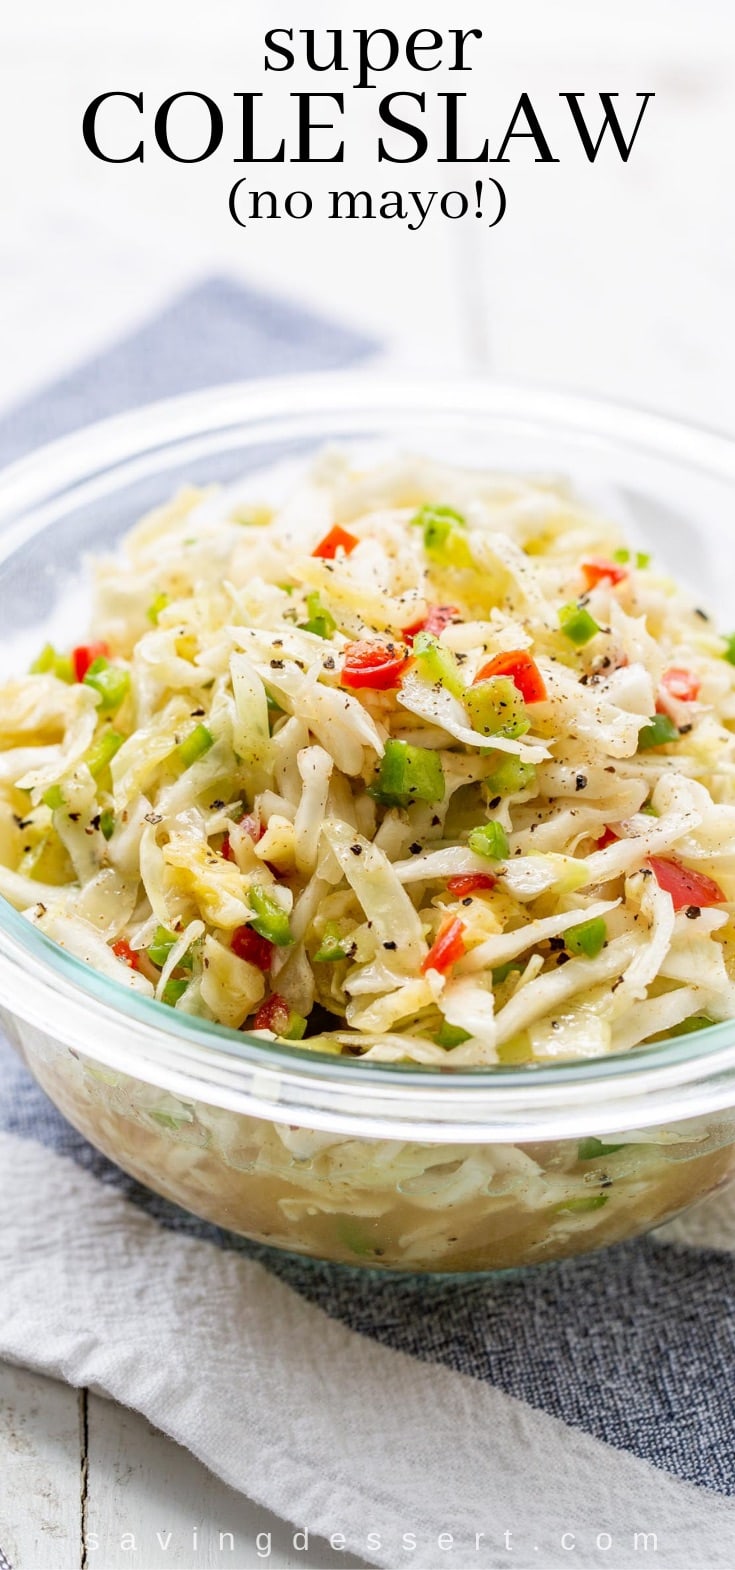 a bowl of mayo-free cabbage cole slaw with pimentos and green bell pepper